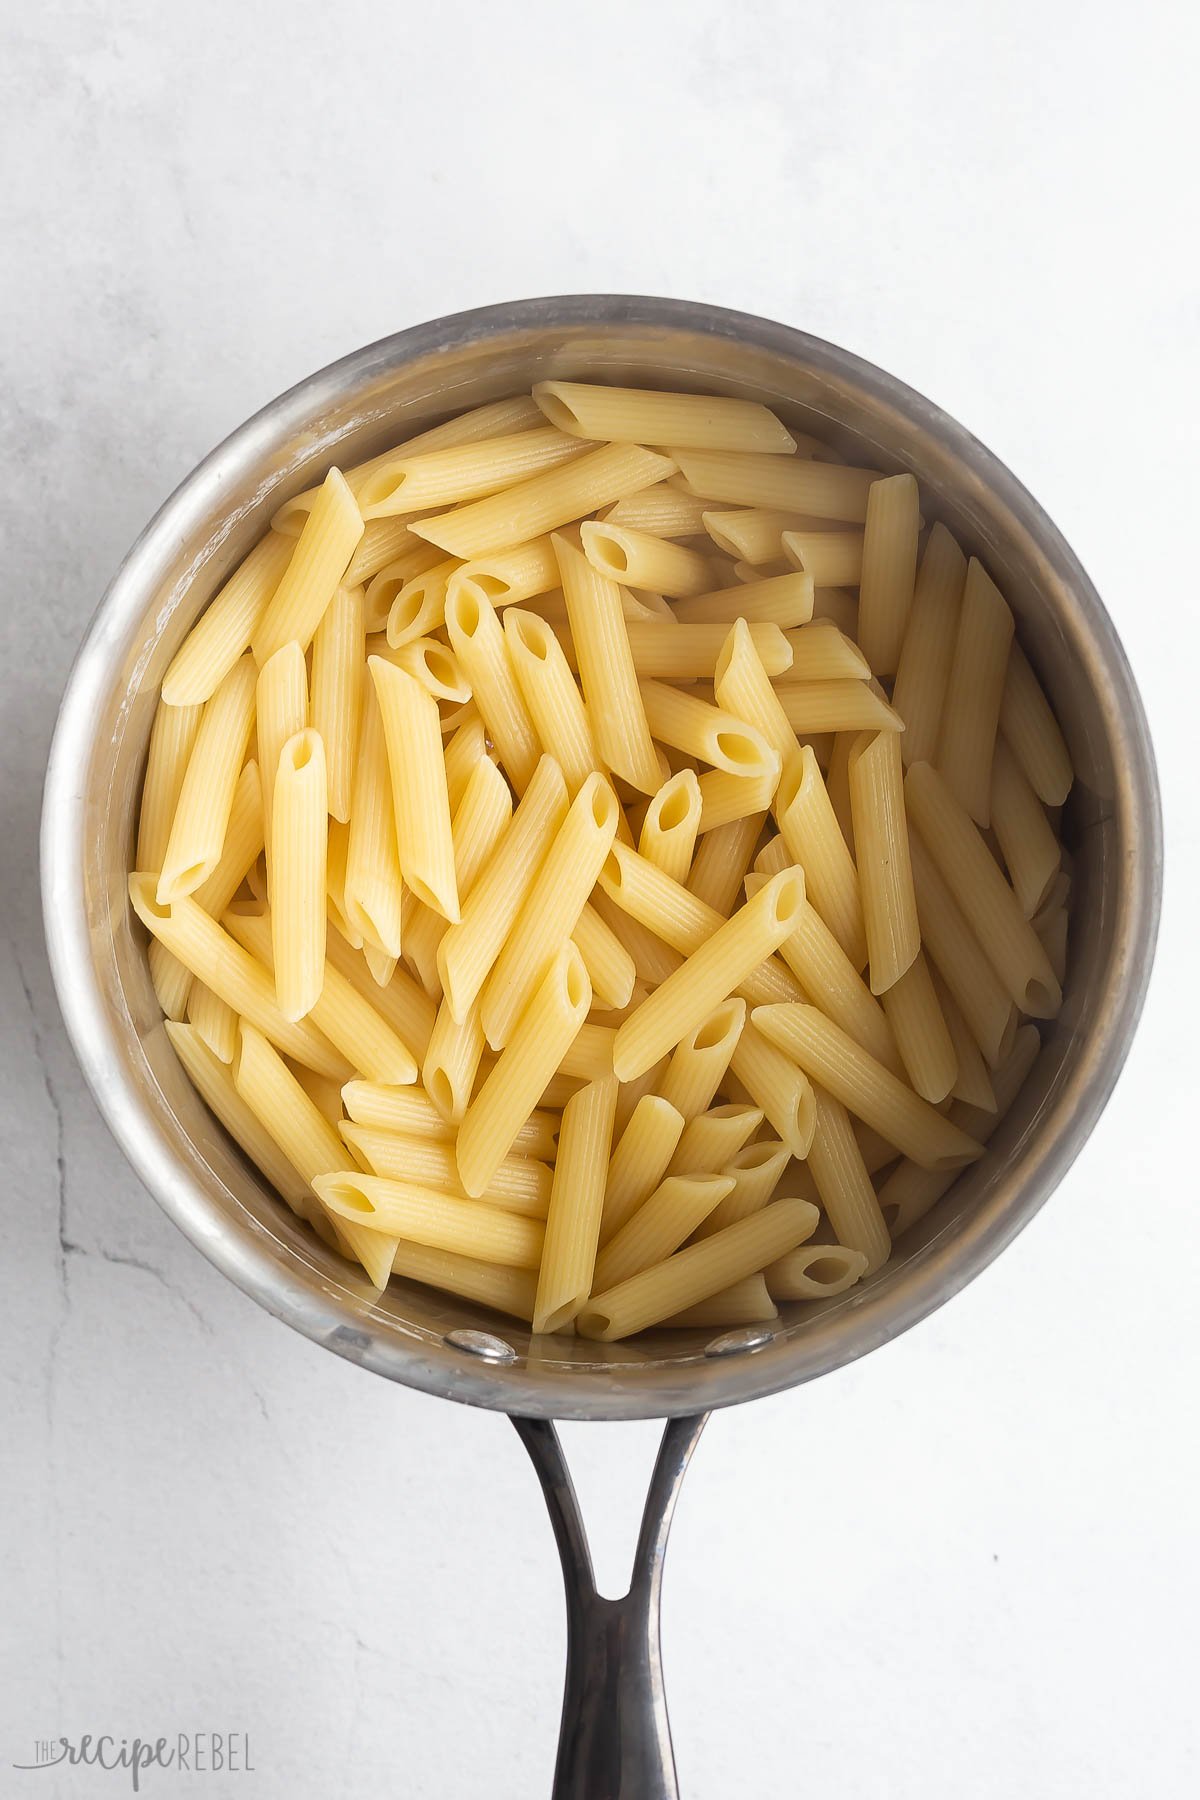 cooked penned pasta in a stainless steel pot